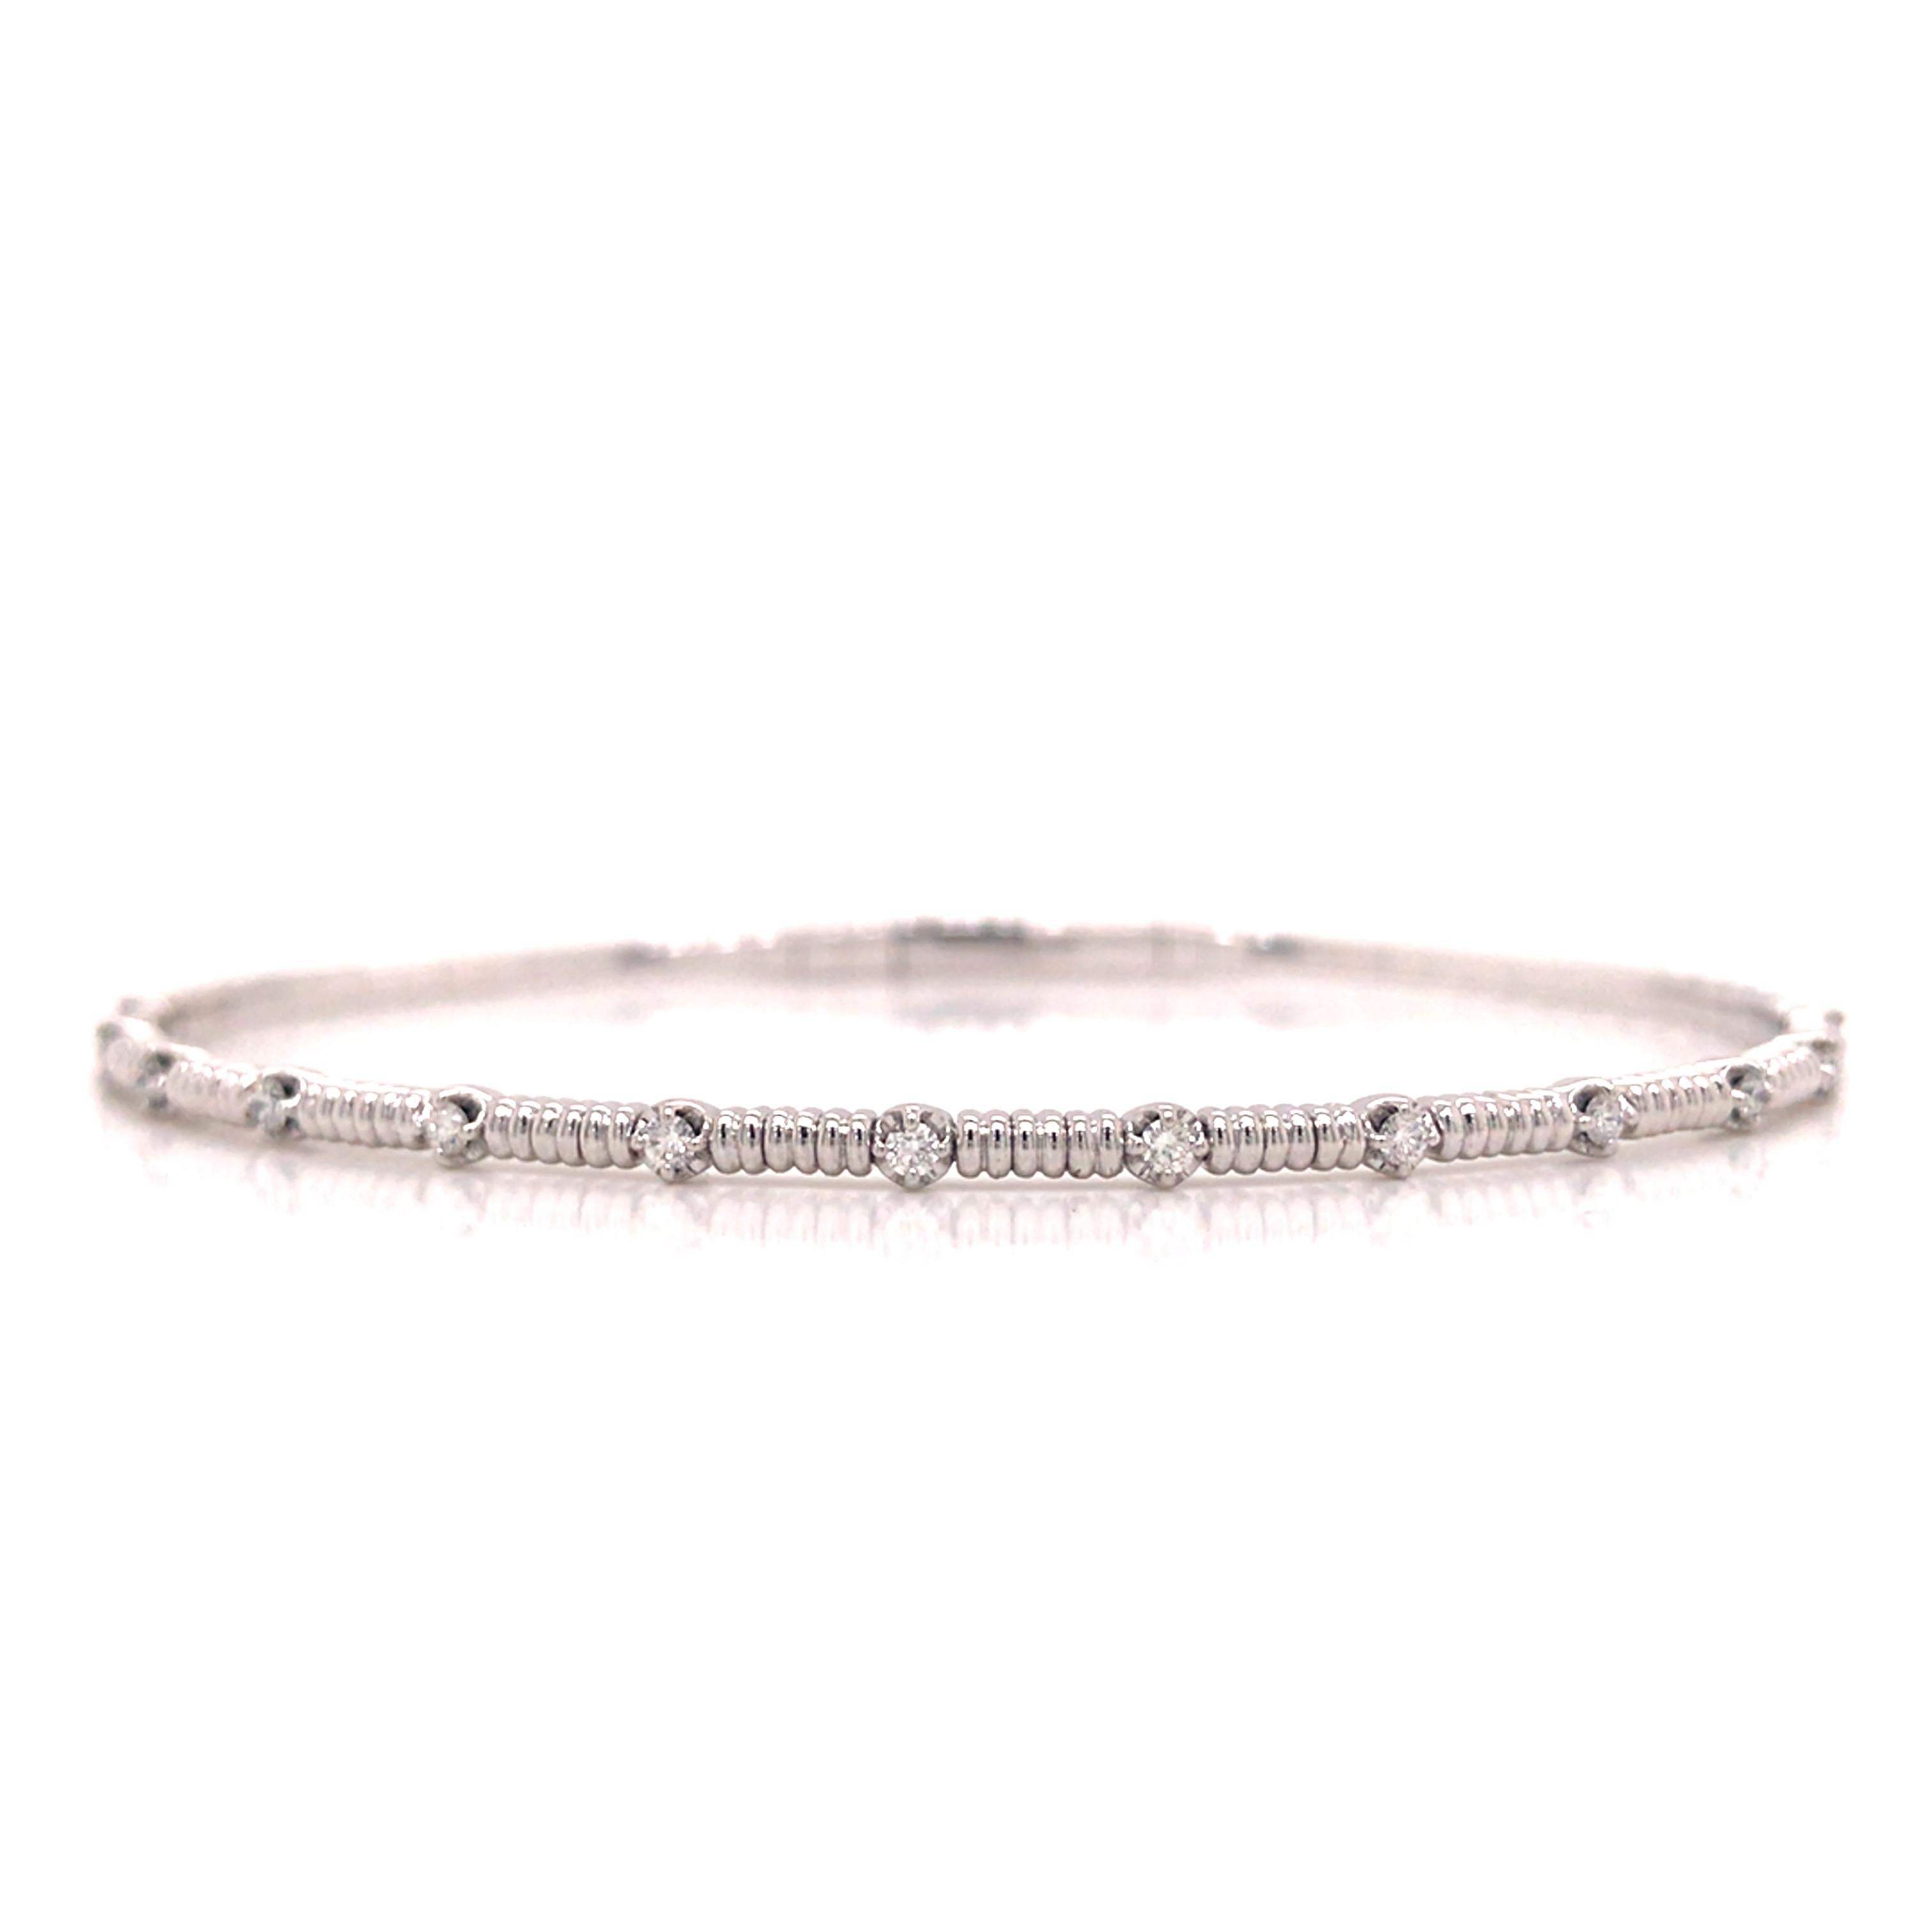 Diamond Flexible Bangle in 14K White Gold.  Round Brilliant Cut Diamonds weighing 0.20 carat total weight, G-H in color and VS-SI in clarity are expertly set.  The Bangle measures 6 1/2 inch and 1/16 inch in width.  5.59 grams.